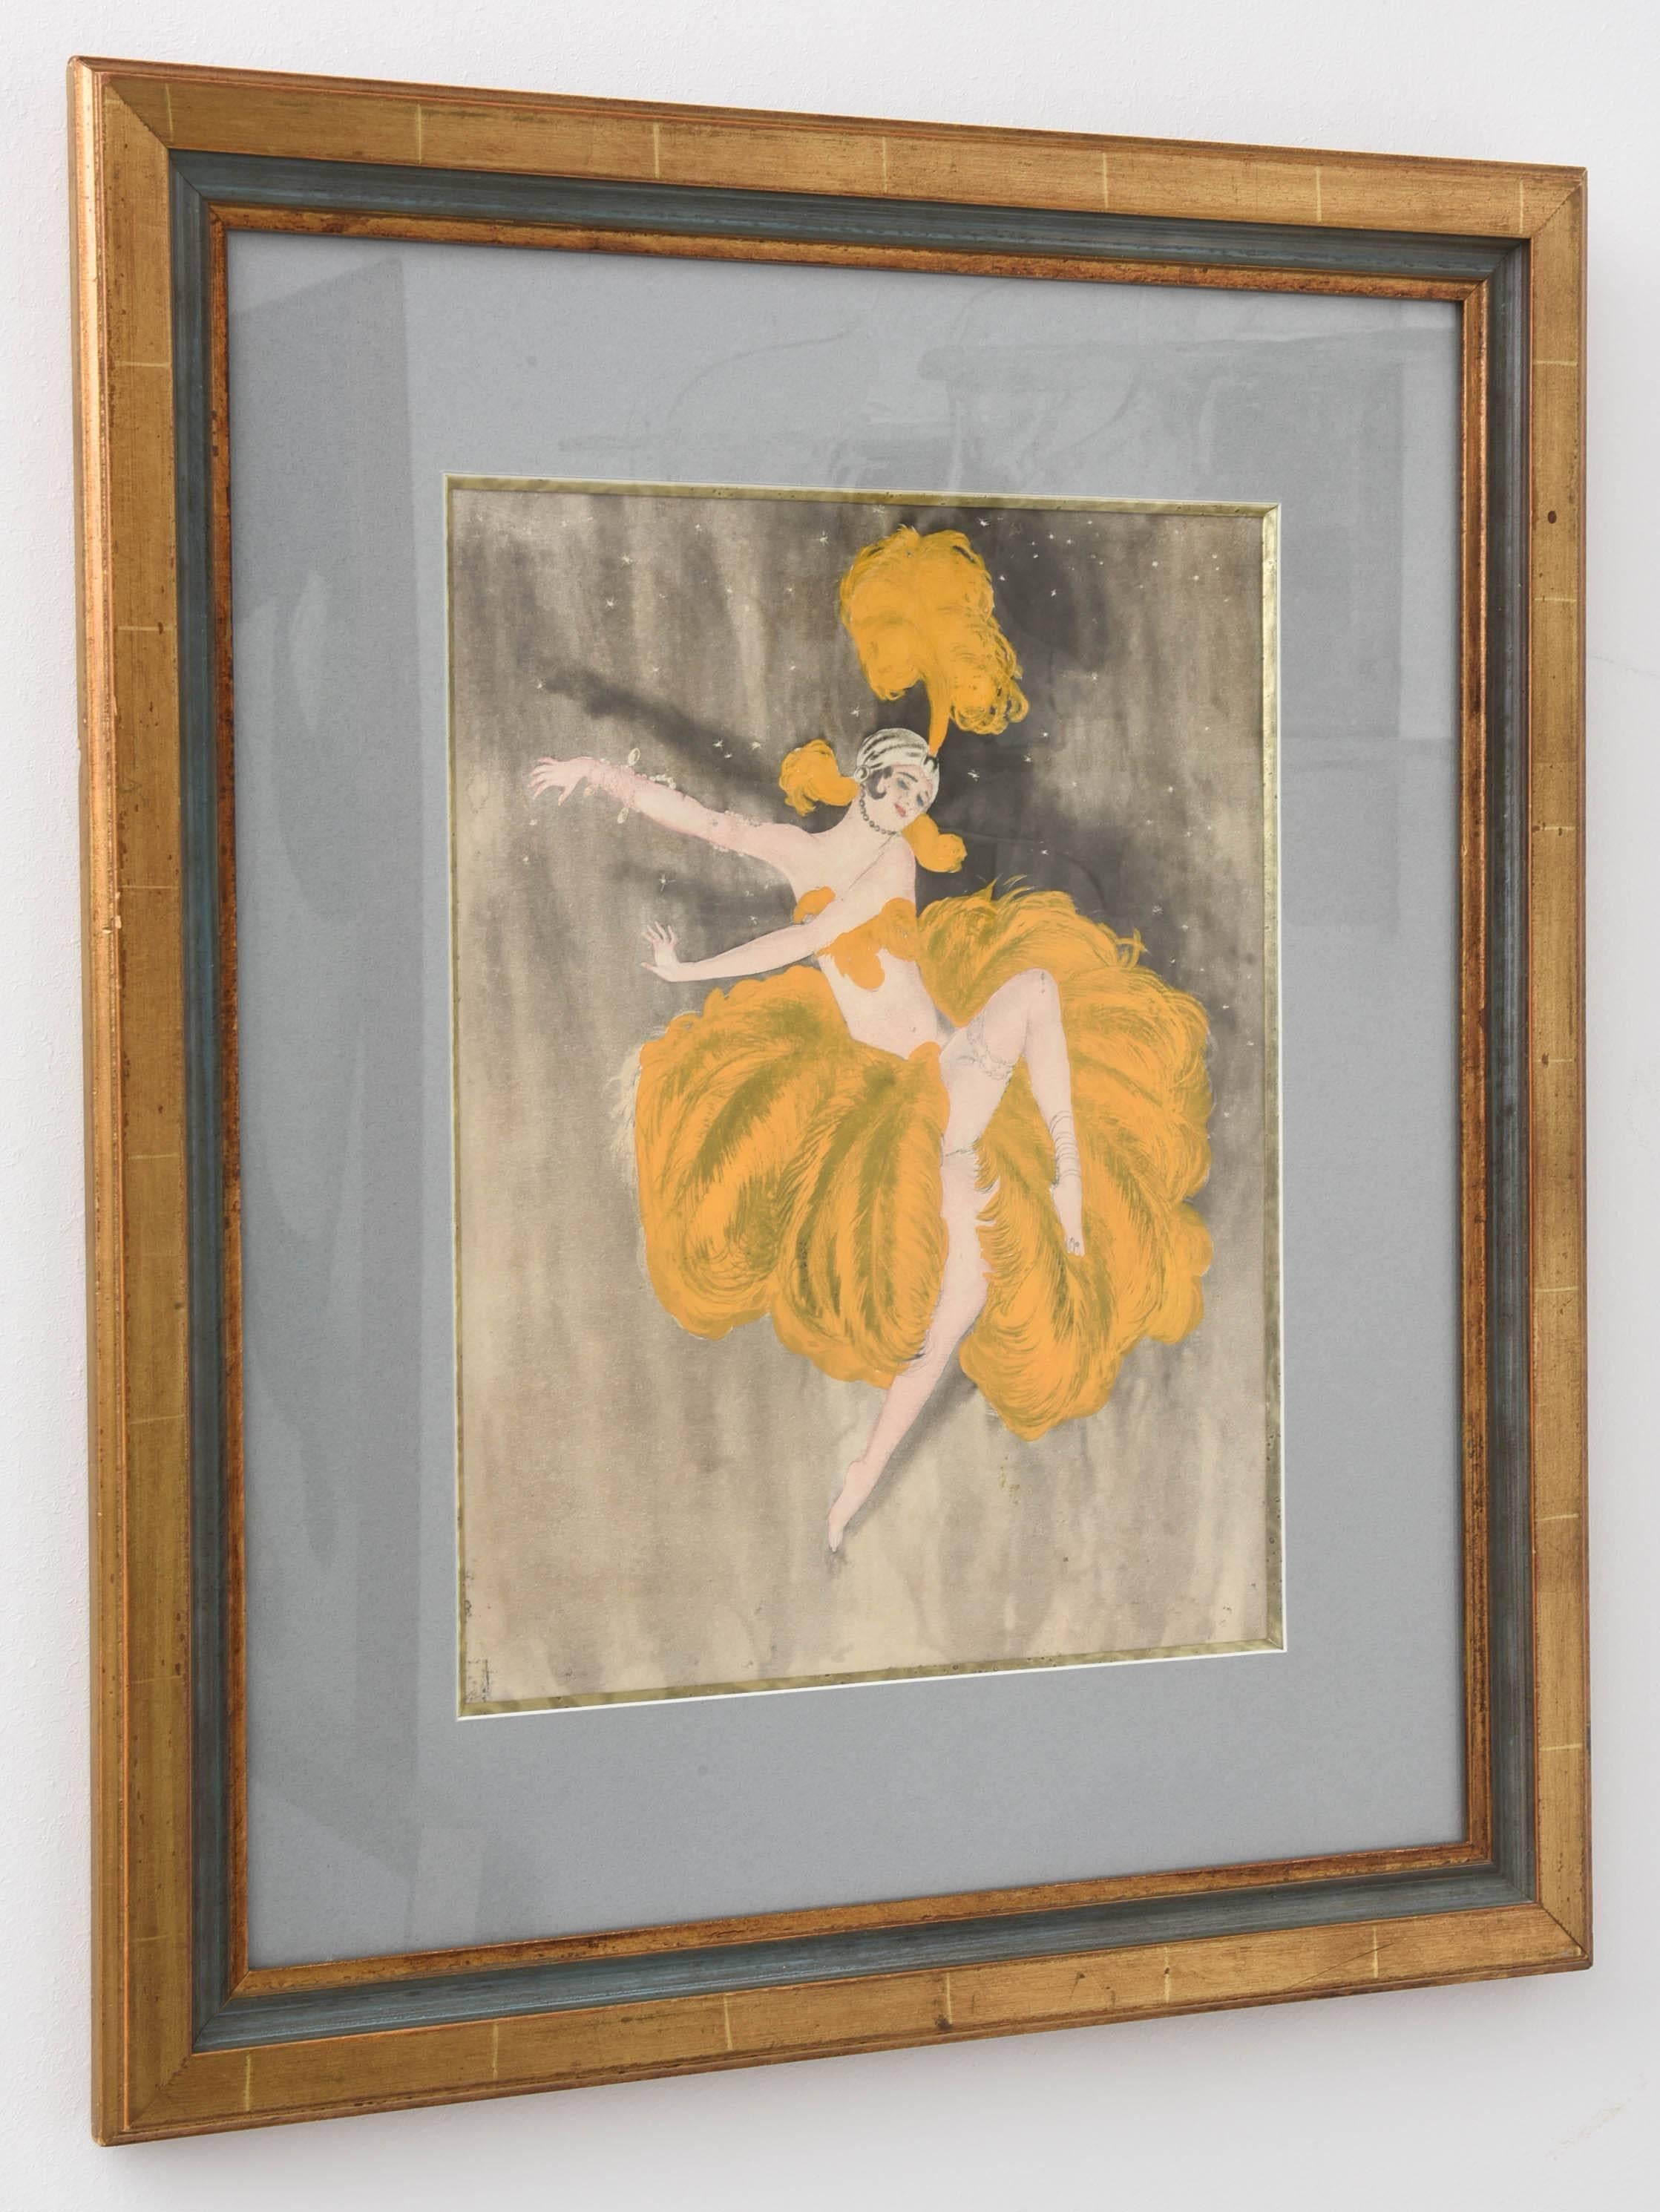 This stylish and beautiful image of an exotic dancer in her marigold-yellow colored ostrich plumes dances with grace and emotion across the stage.

For best net trade price or additional questions regarding this item, please click the 